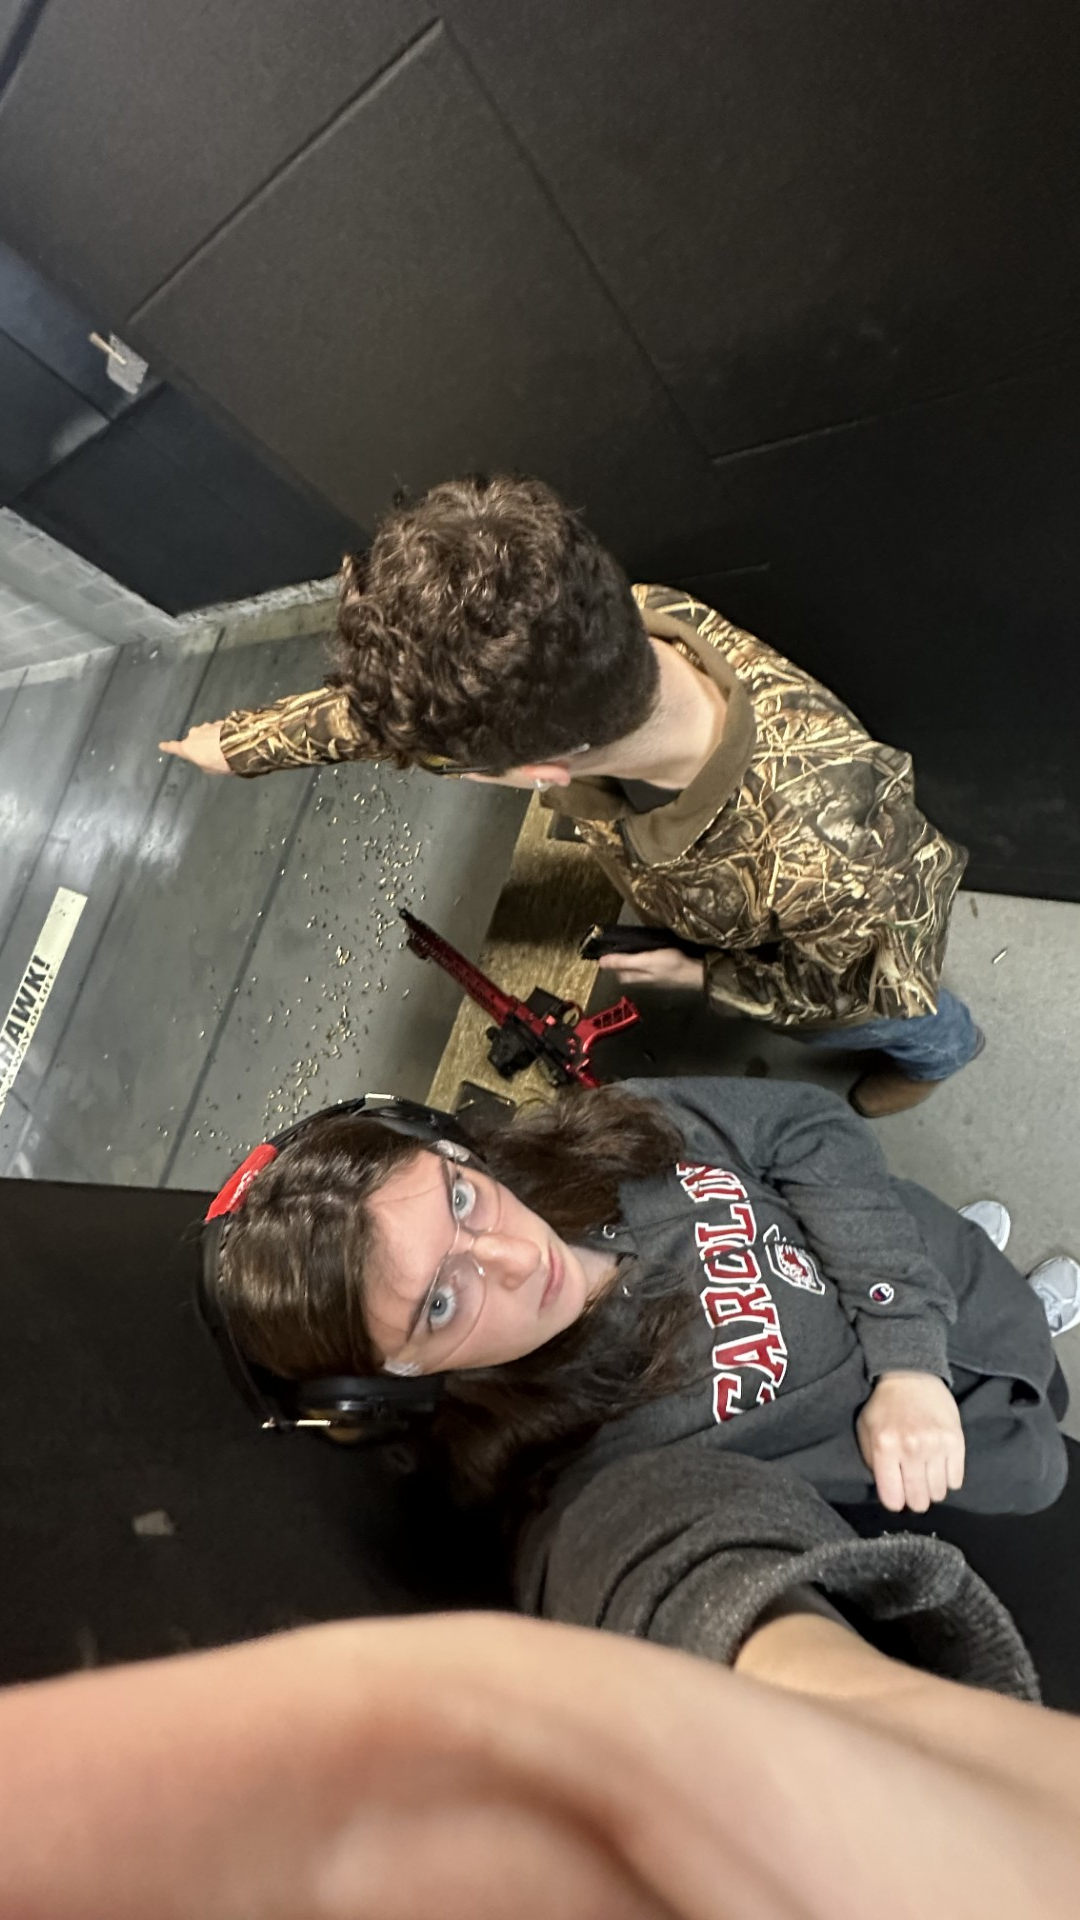 The image shows two people at a shooting range. The person in the foreground is wearing protective headphones and eyewear, while the other is aiming a rifle.